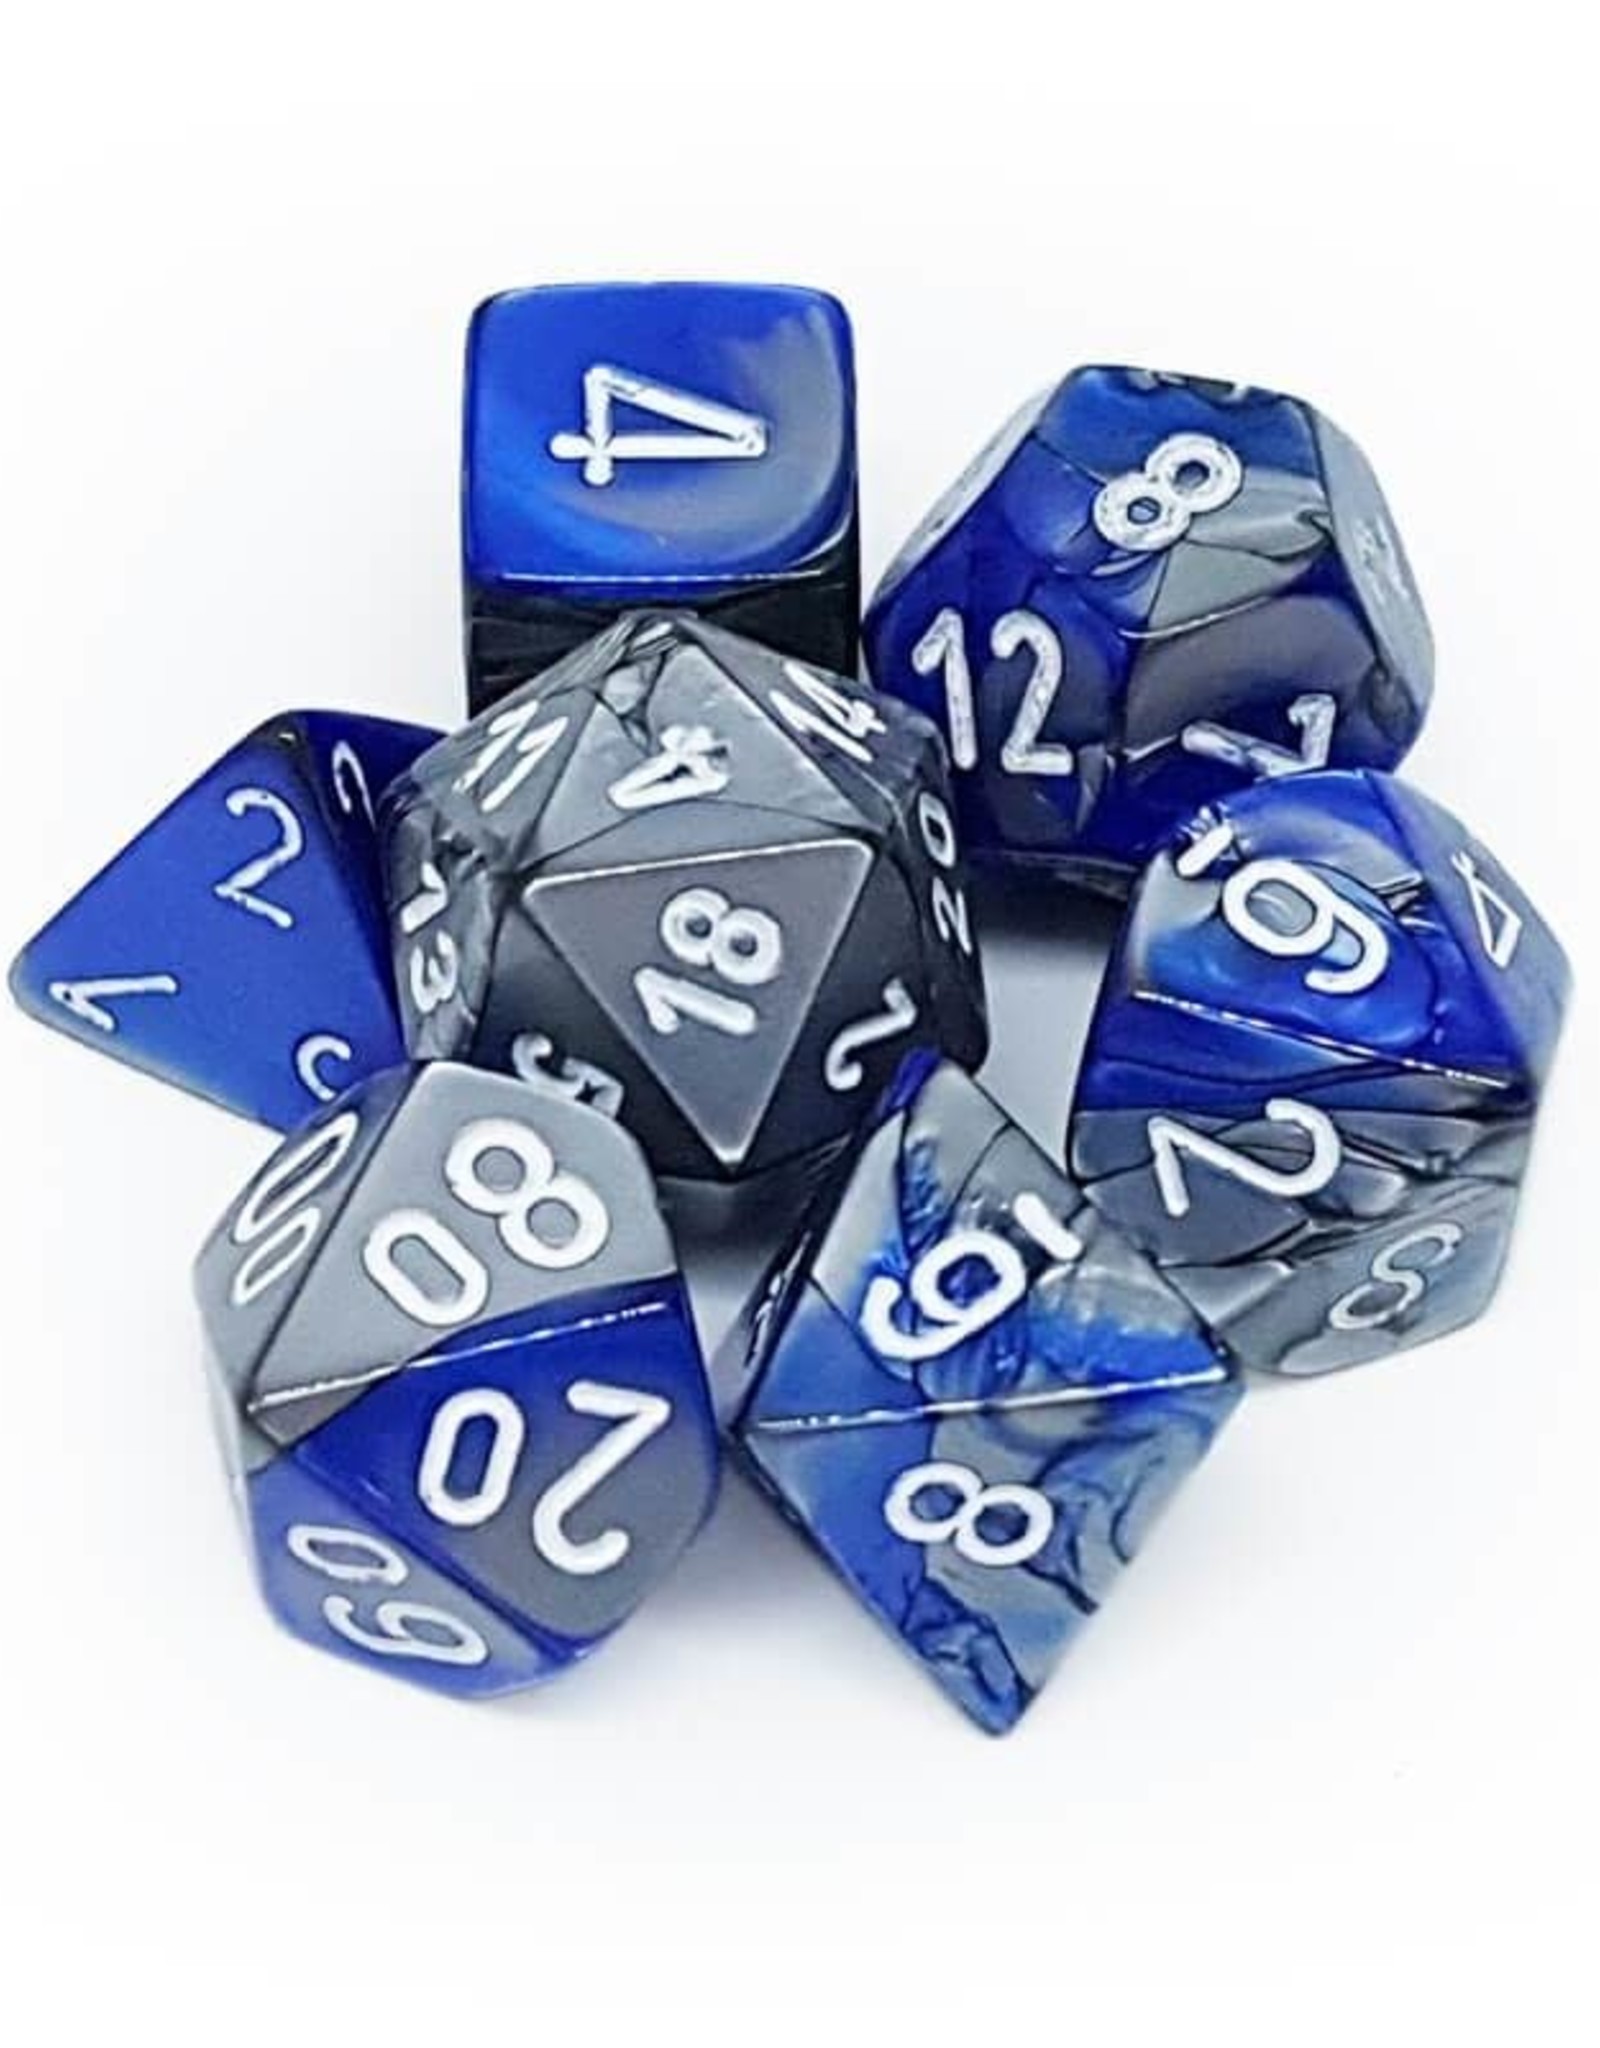 Chessex Dice -  7pc Gemini Blue-Steel /White Polyhedral